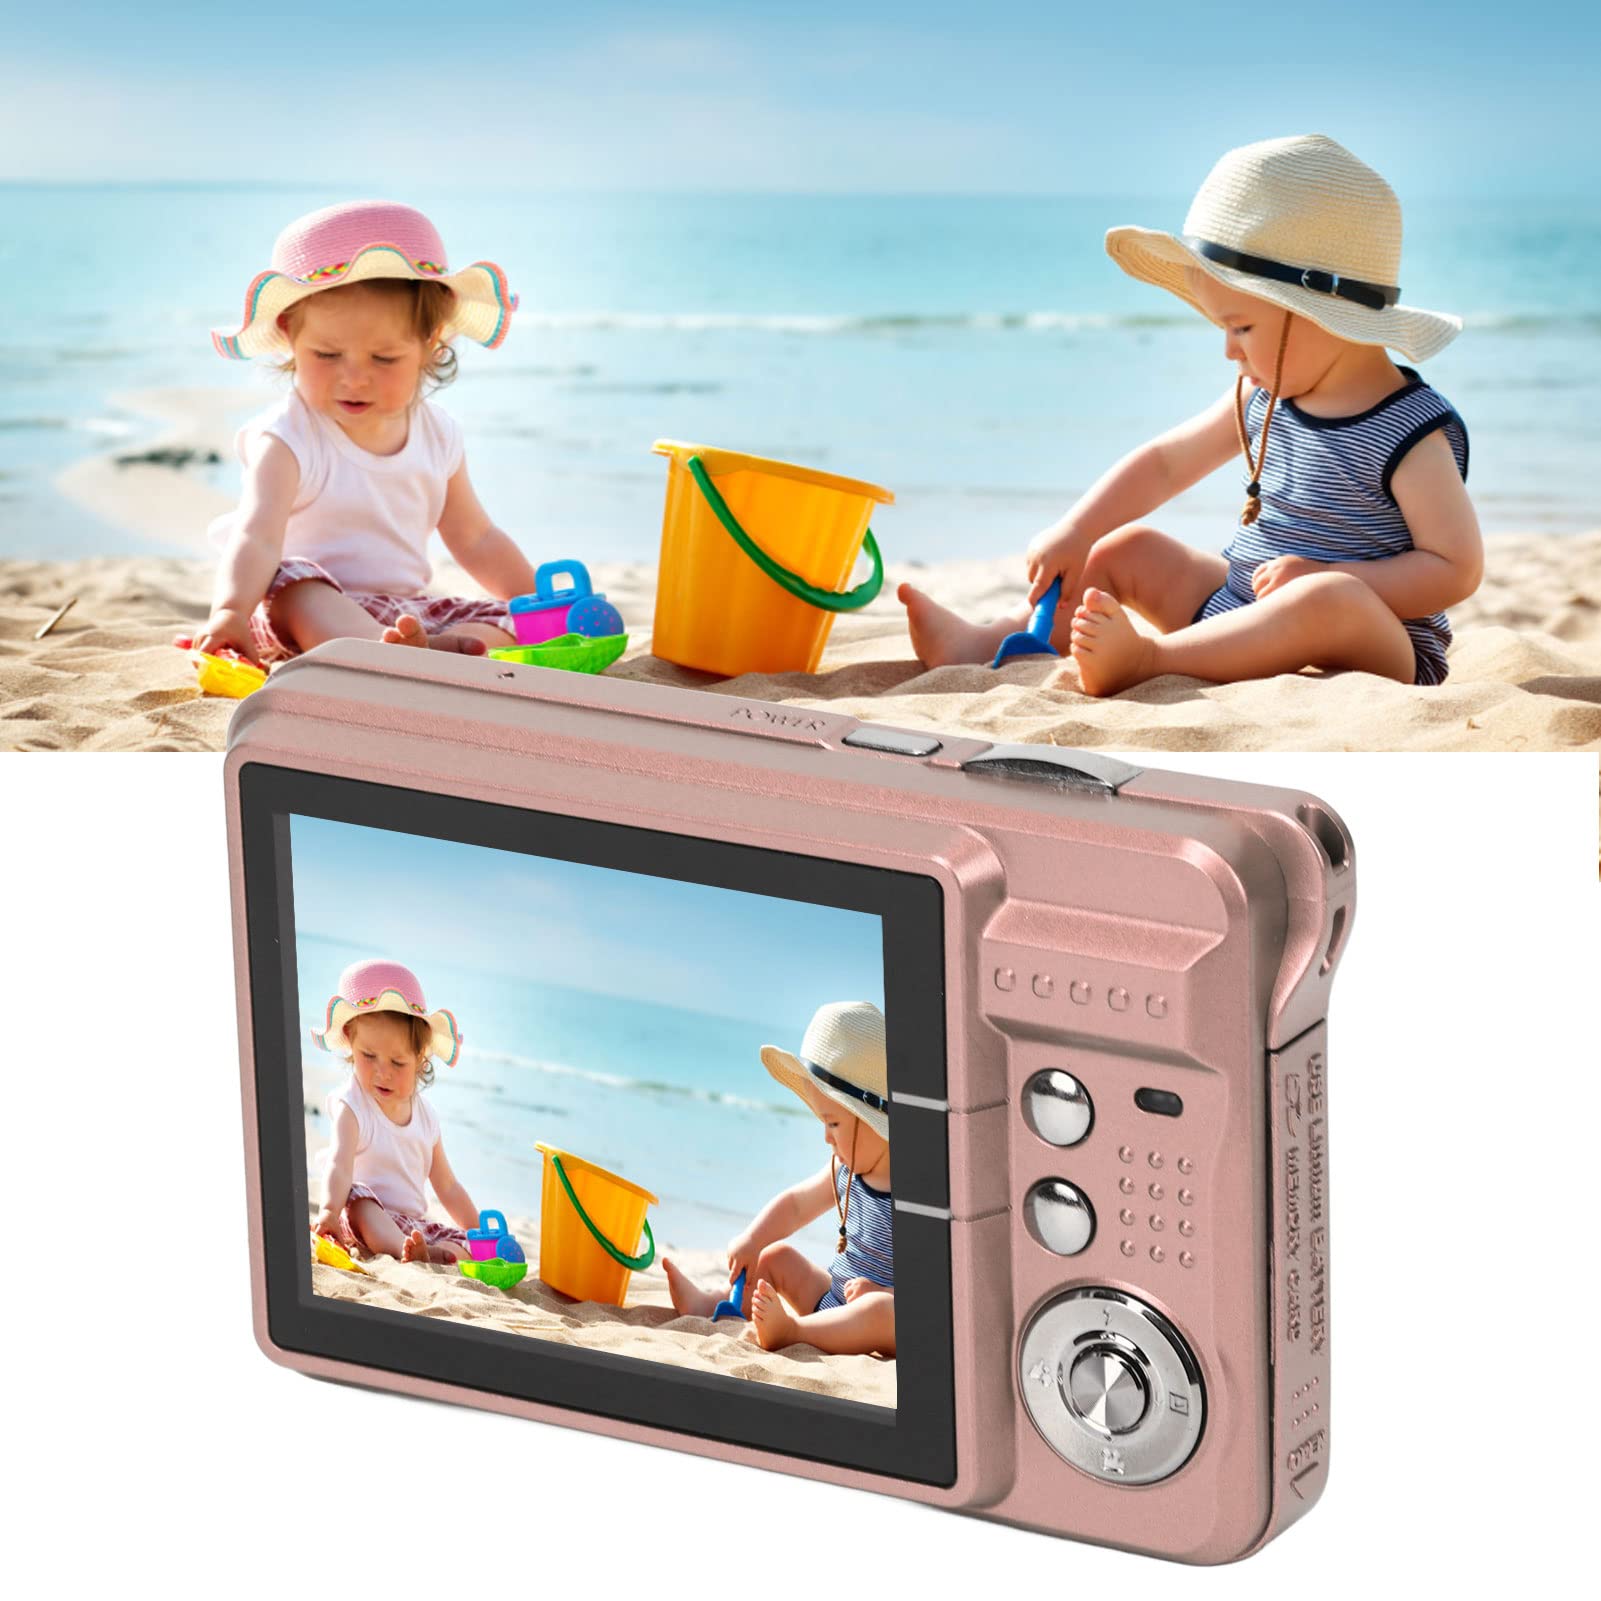 4K Digital Camera 48MP with 8X Zoom and 2.7in LCD Screen, Rechargeable Pocket Camera and 128GB Memory Card Support, USB Transfer Camera Camera for Beginners (Pink)